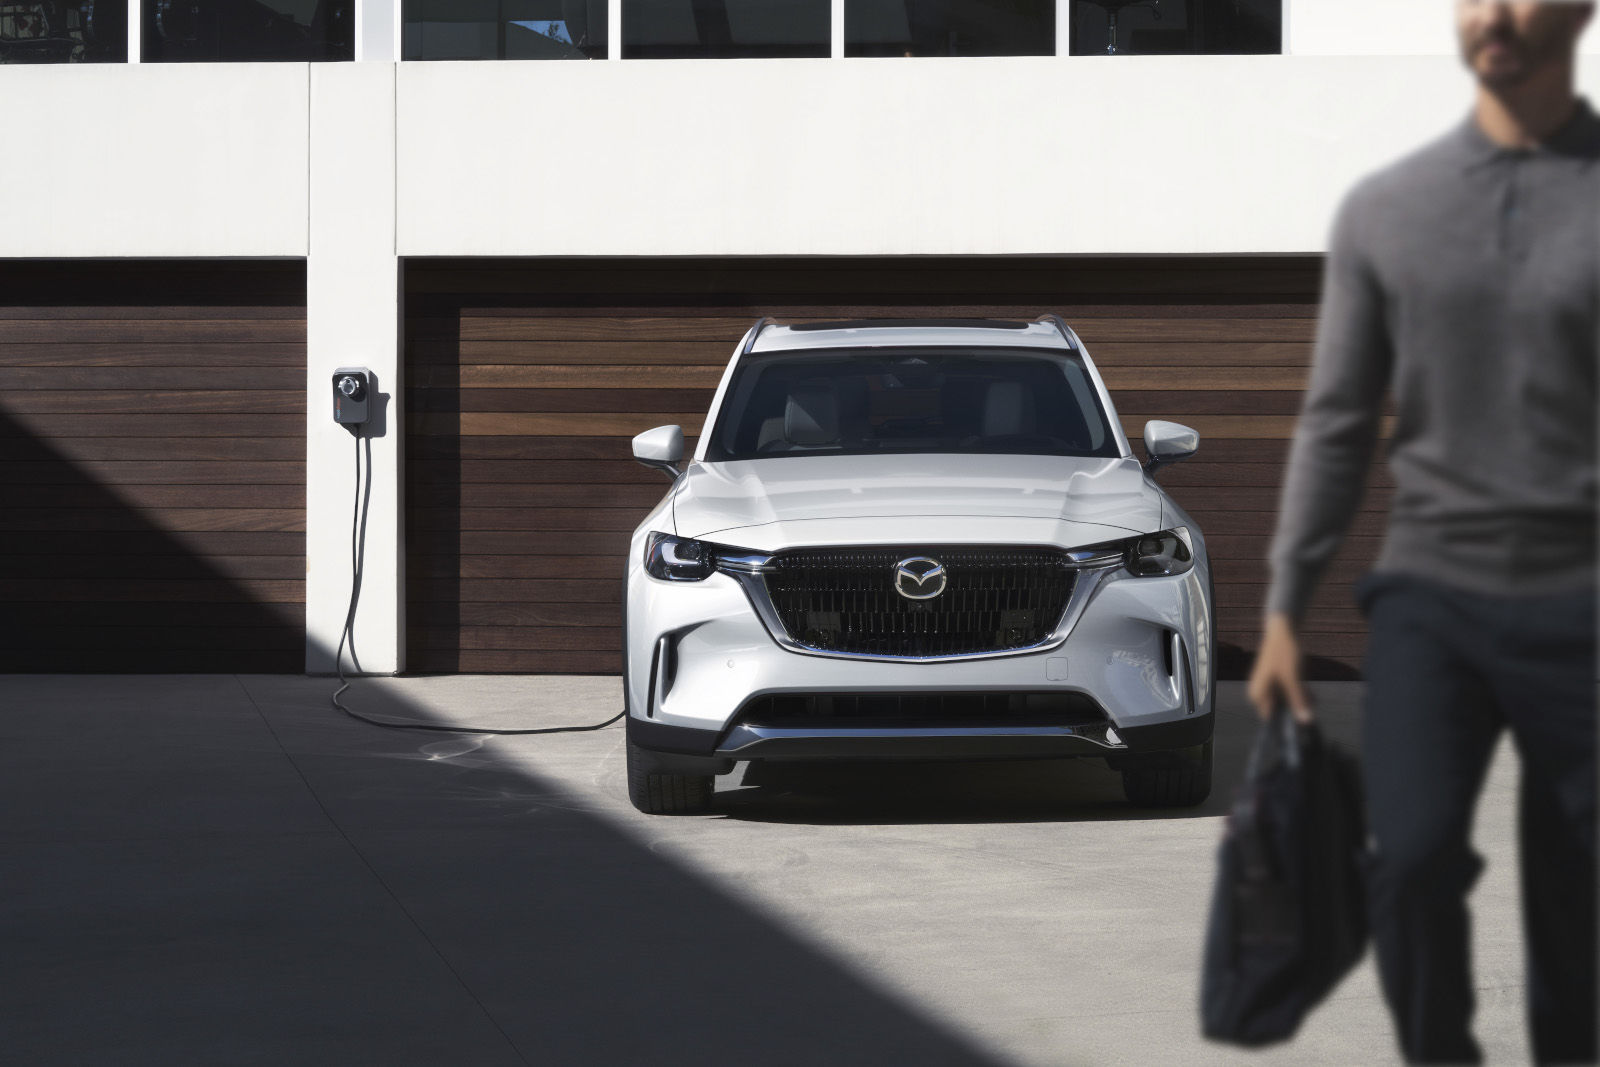 Mazda Adopts Tesla's Charging Standard for Upcoming Electric Vehicles in North America